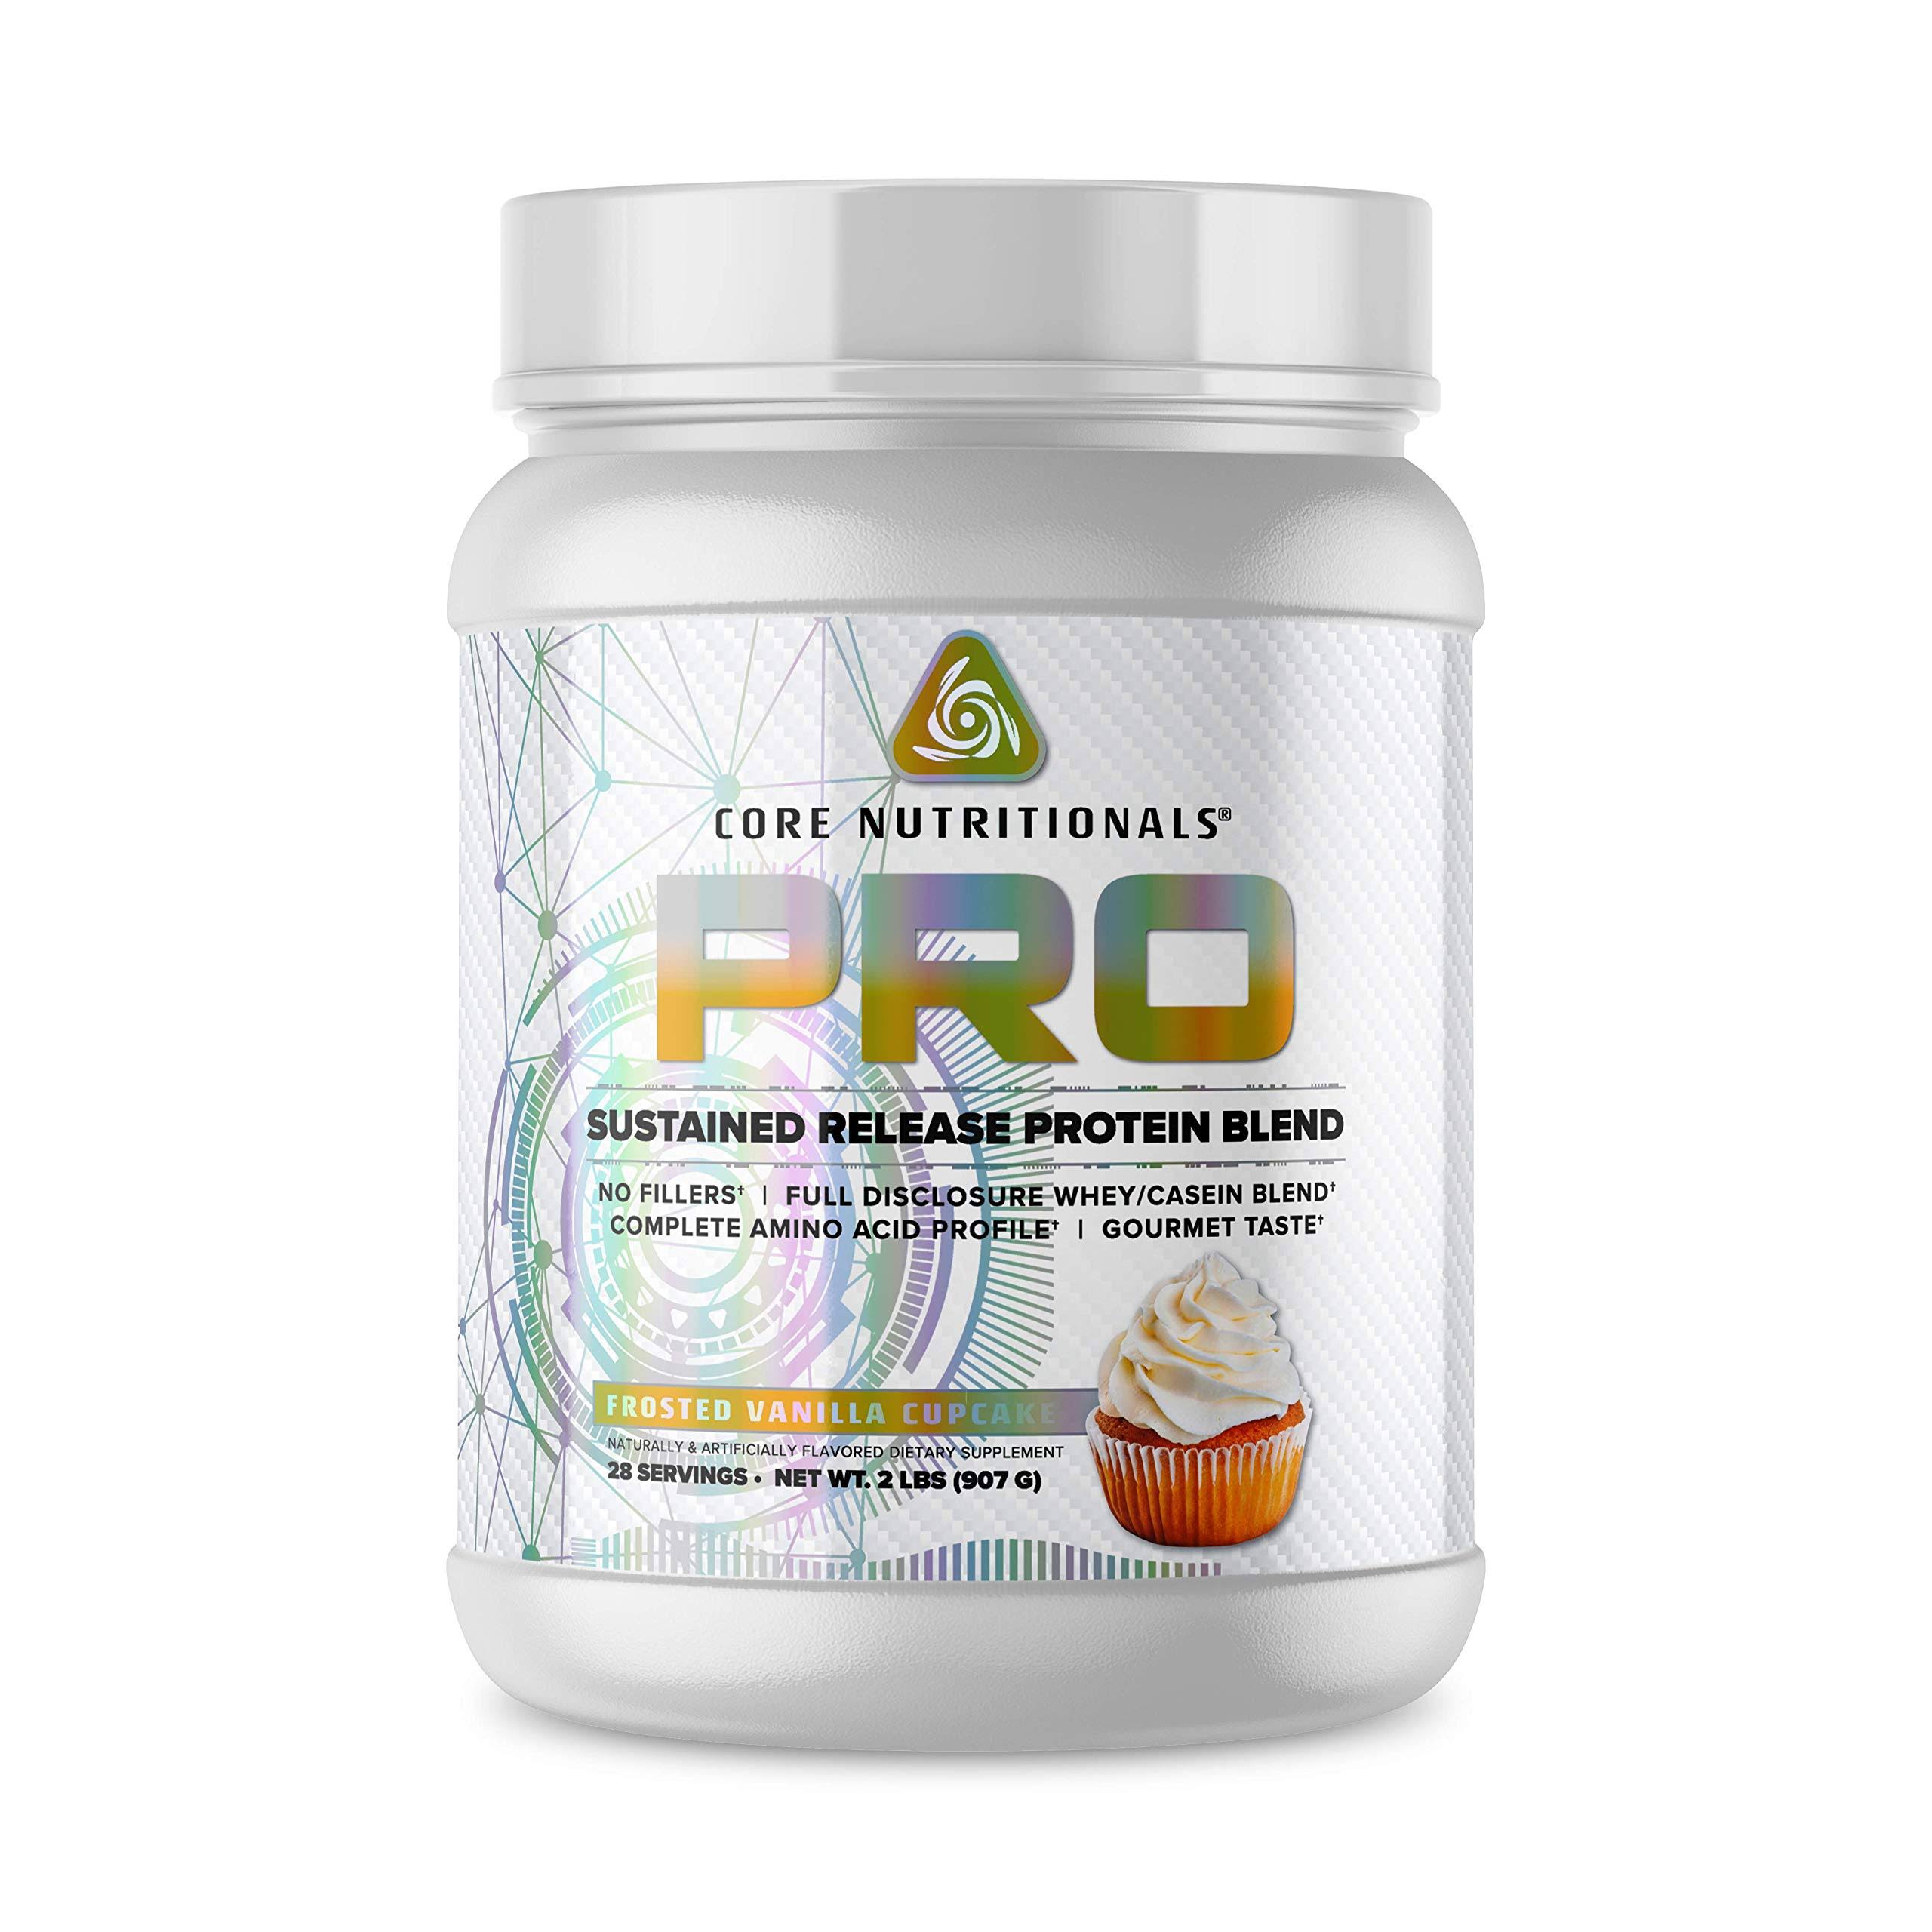 Core Nutritionals Core Pro Protein Blend Frosted Vanilla Cupcake / 2lb